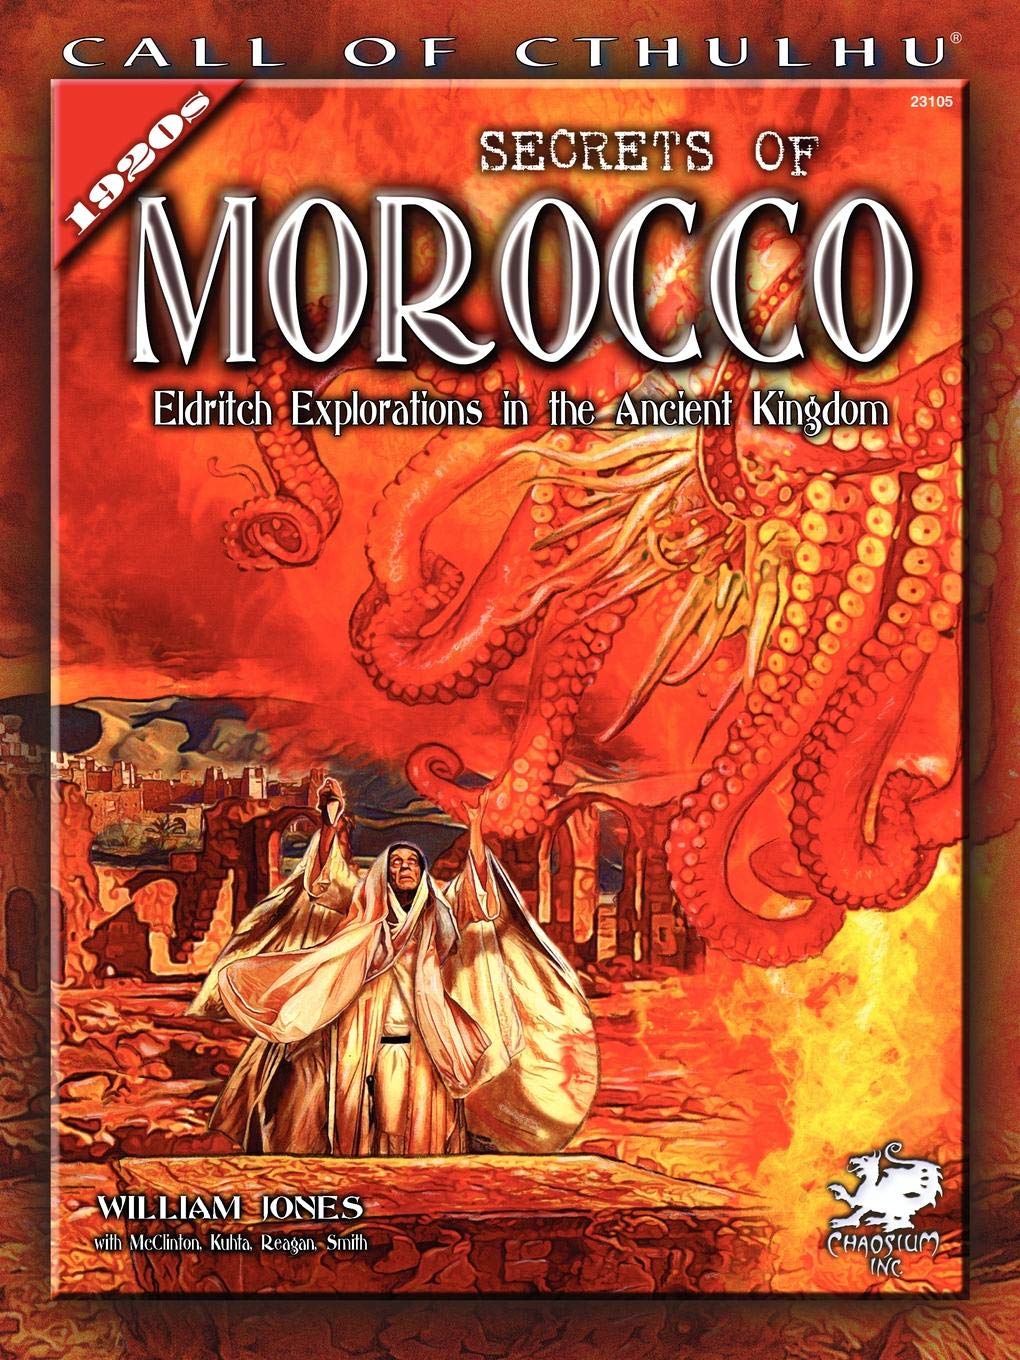 Call of Cthulhu - Secrets of Morocco: Eldritch Explorations in the Ancient Kingdom